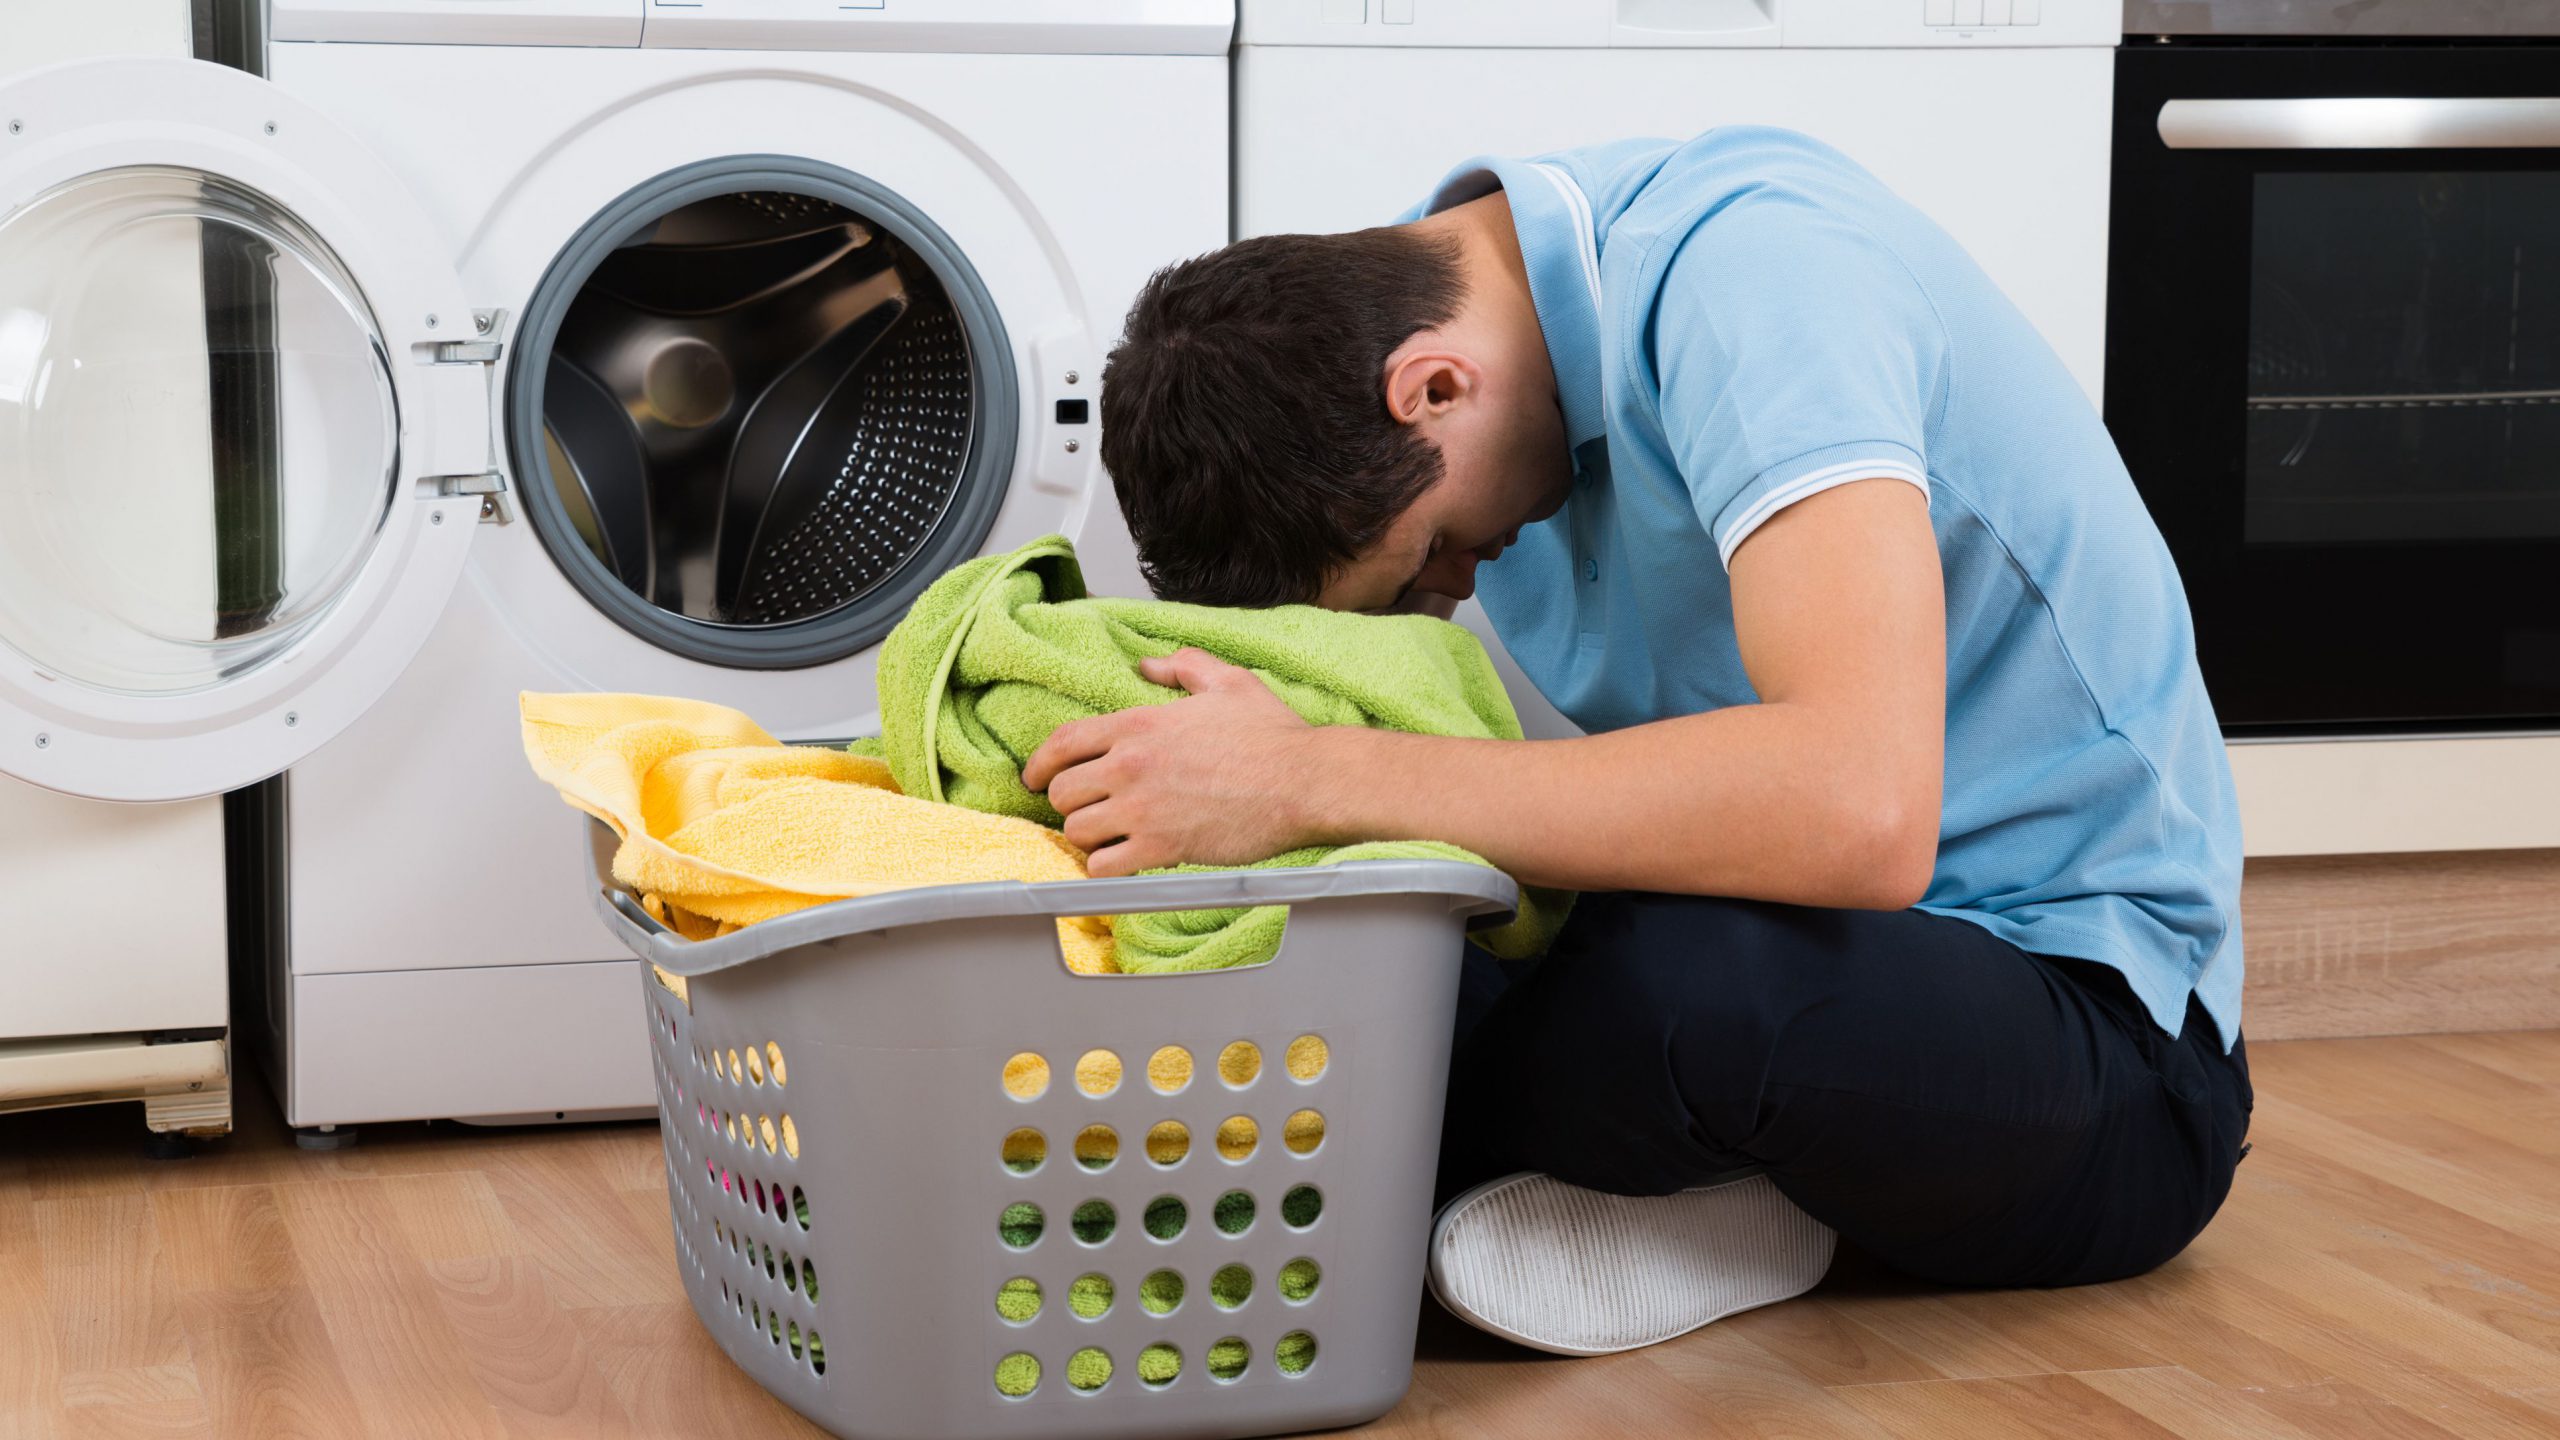 exhausted-man-with-laundry-basket-sitting-by-washing-machine-609626966-5abdb1d7ae9ab8003729789d